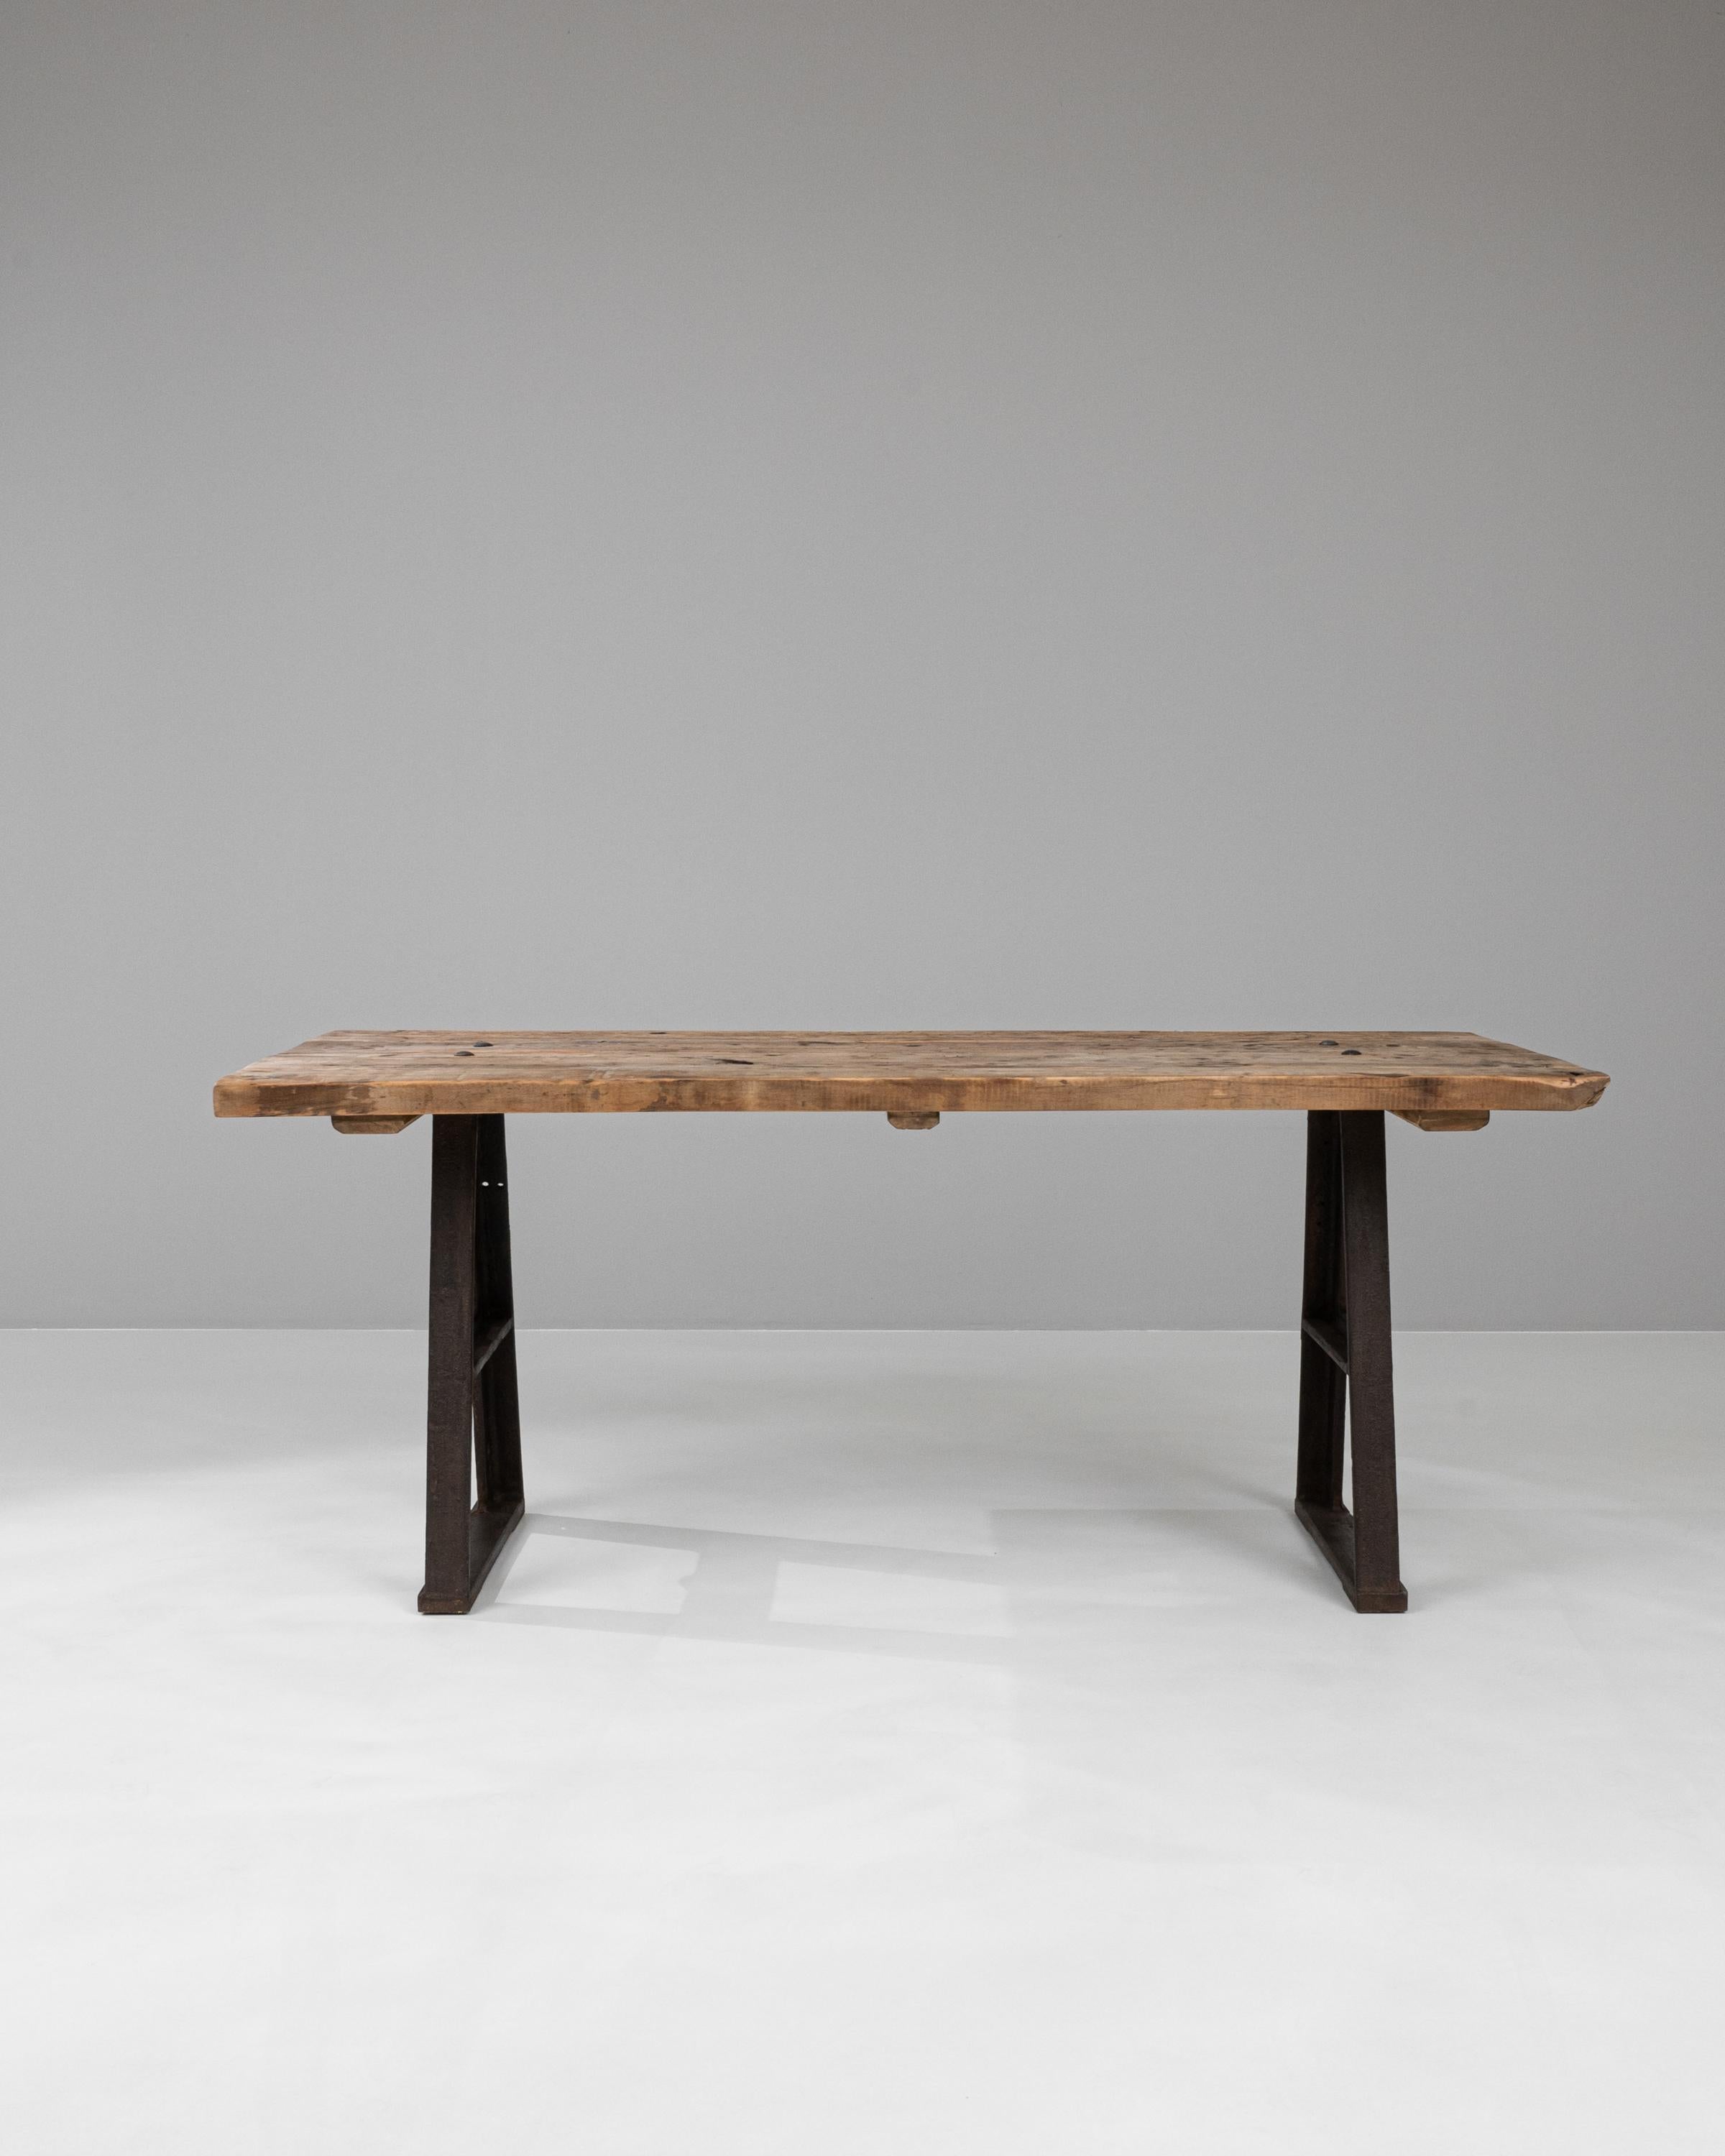 This Early 20th Century French Industrial Table is a splendid representation of utilitarian design fused with rustic charm. Its robust, dark iron legs flaunt a unique A-frame shape, indicative of the industrial era's focus on strength and